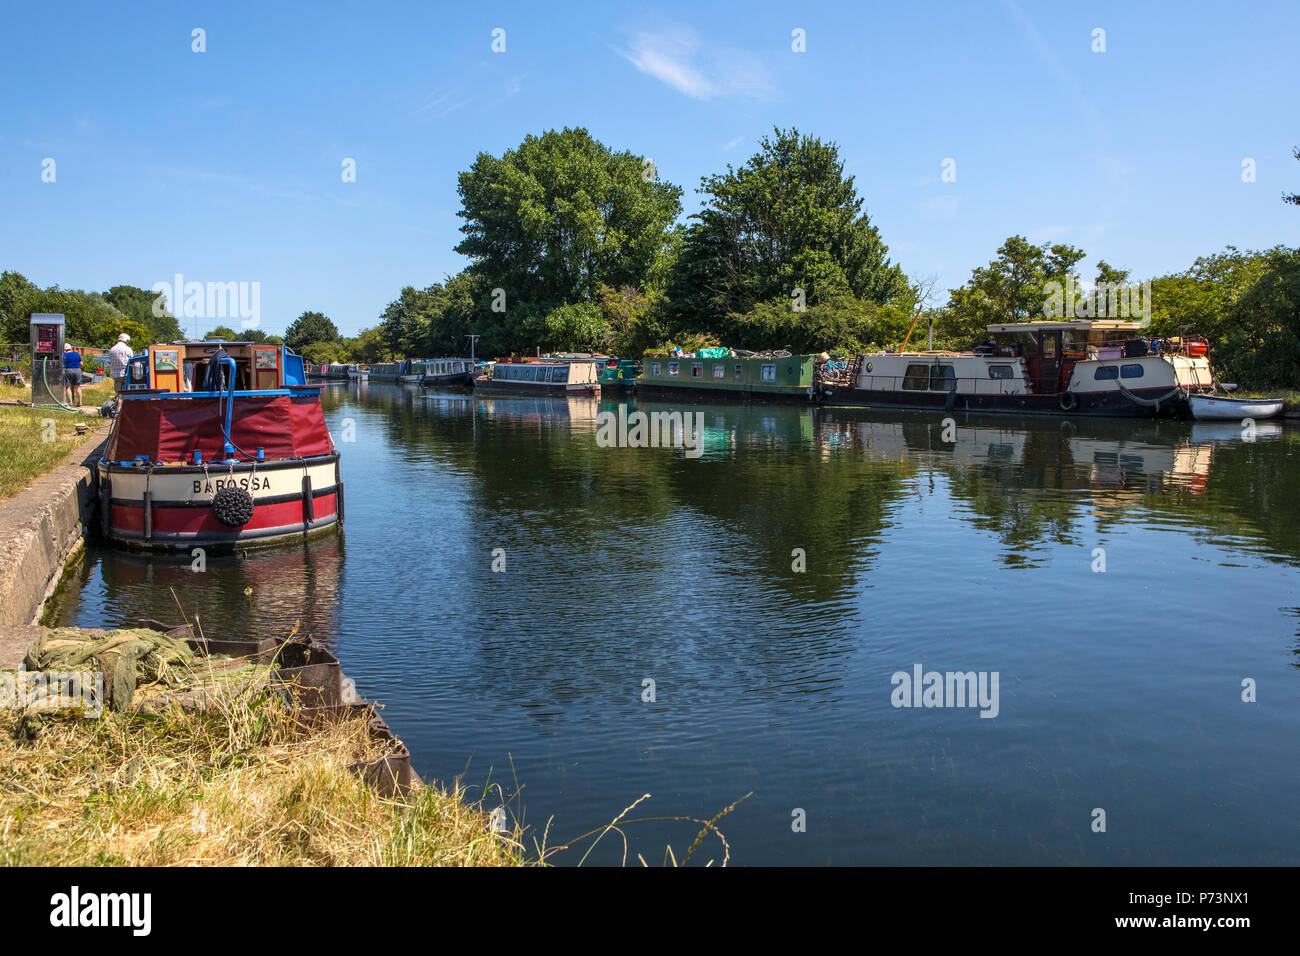 LONDON, UK - JULY 3RD 2018: A view of the House Boats moored on the River Lea at Stonebridge Lock in Tottenham, London, on 3rd July 2018. Stock Photo